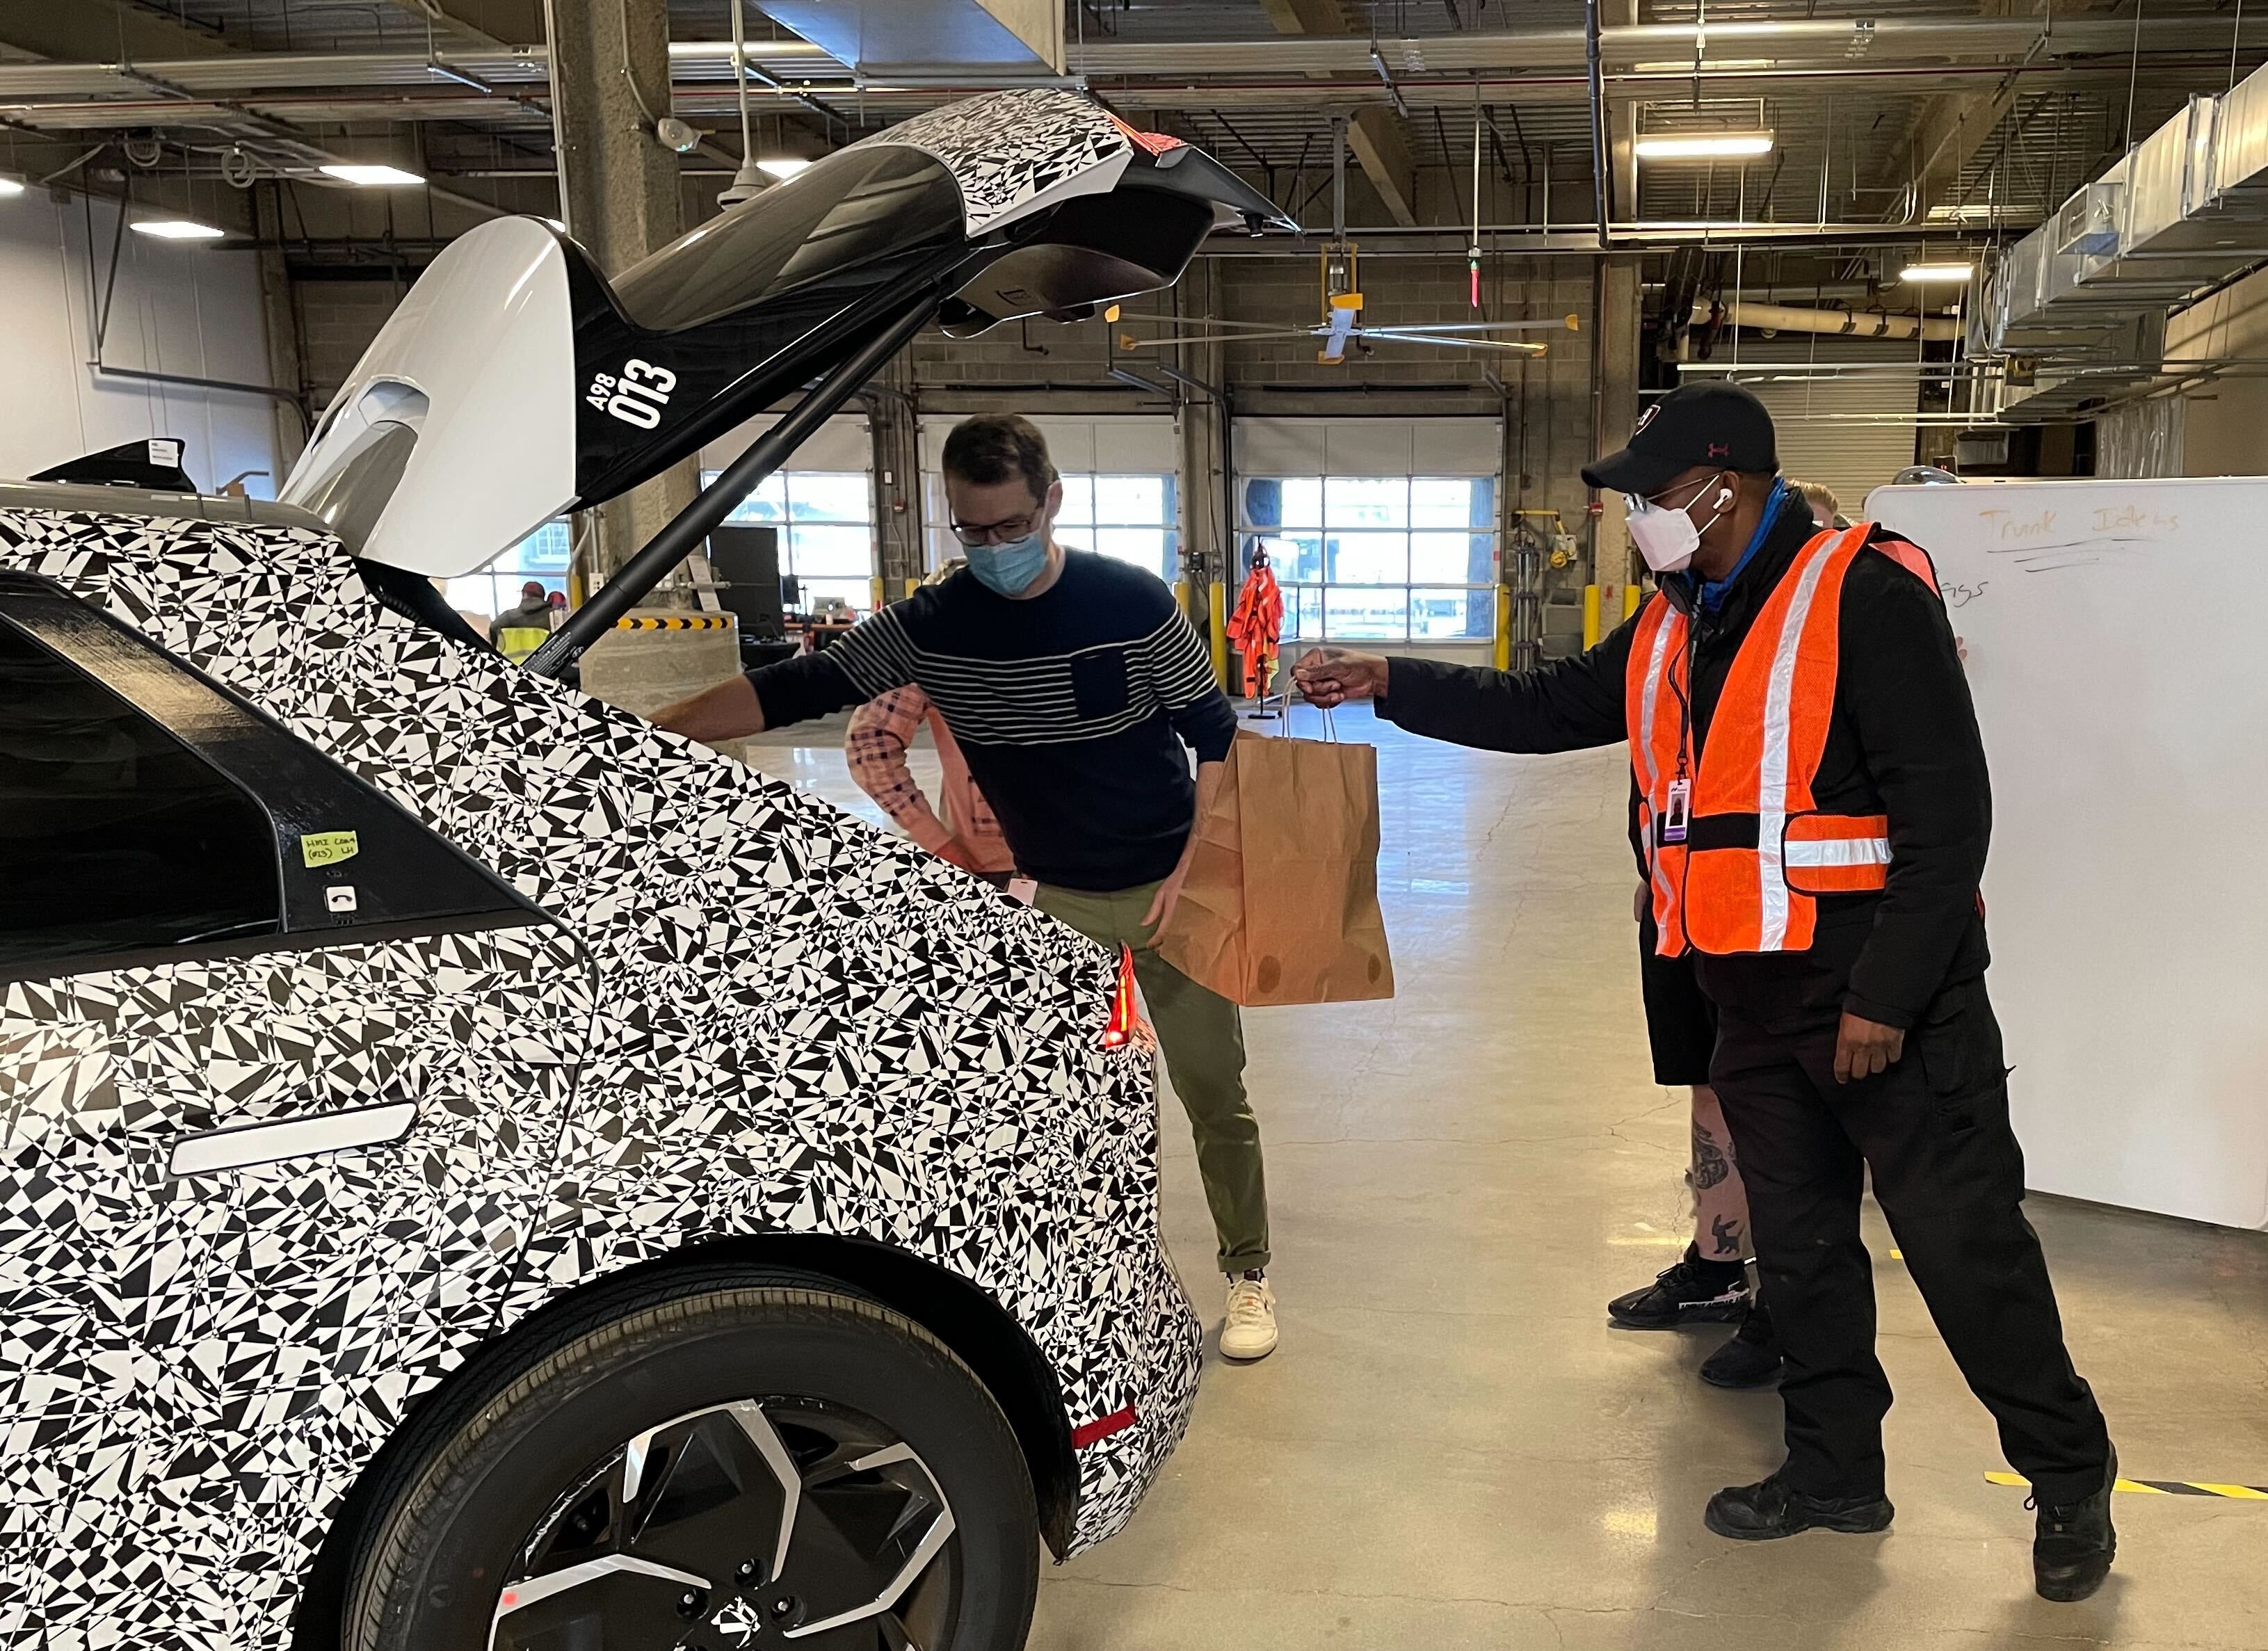 Motional employees stand at the rear of an IONIQ 5 robotaxi placing bags in the trunk